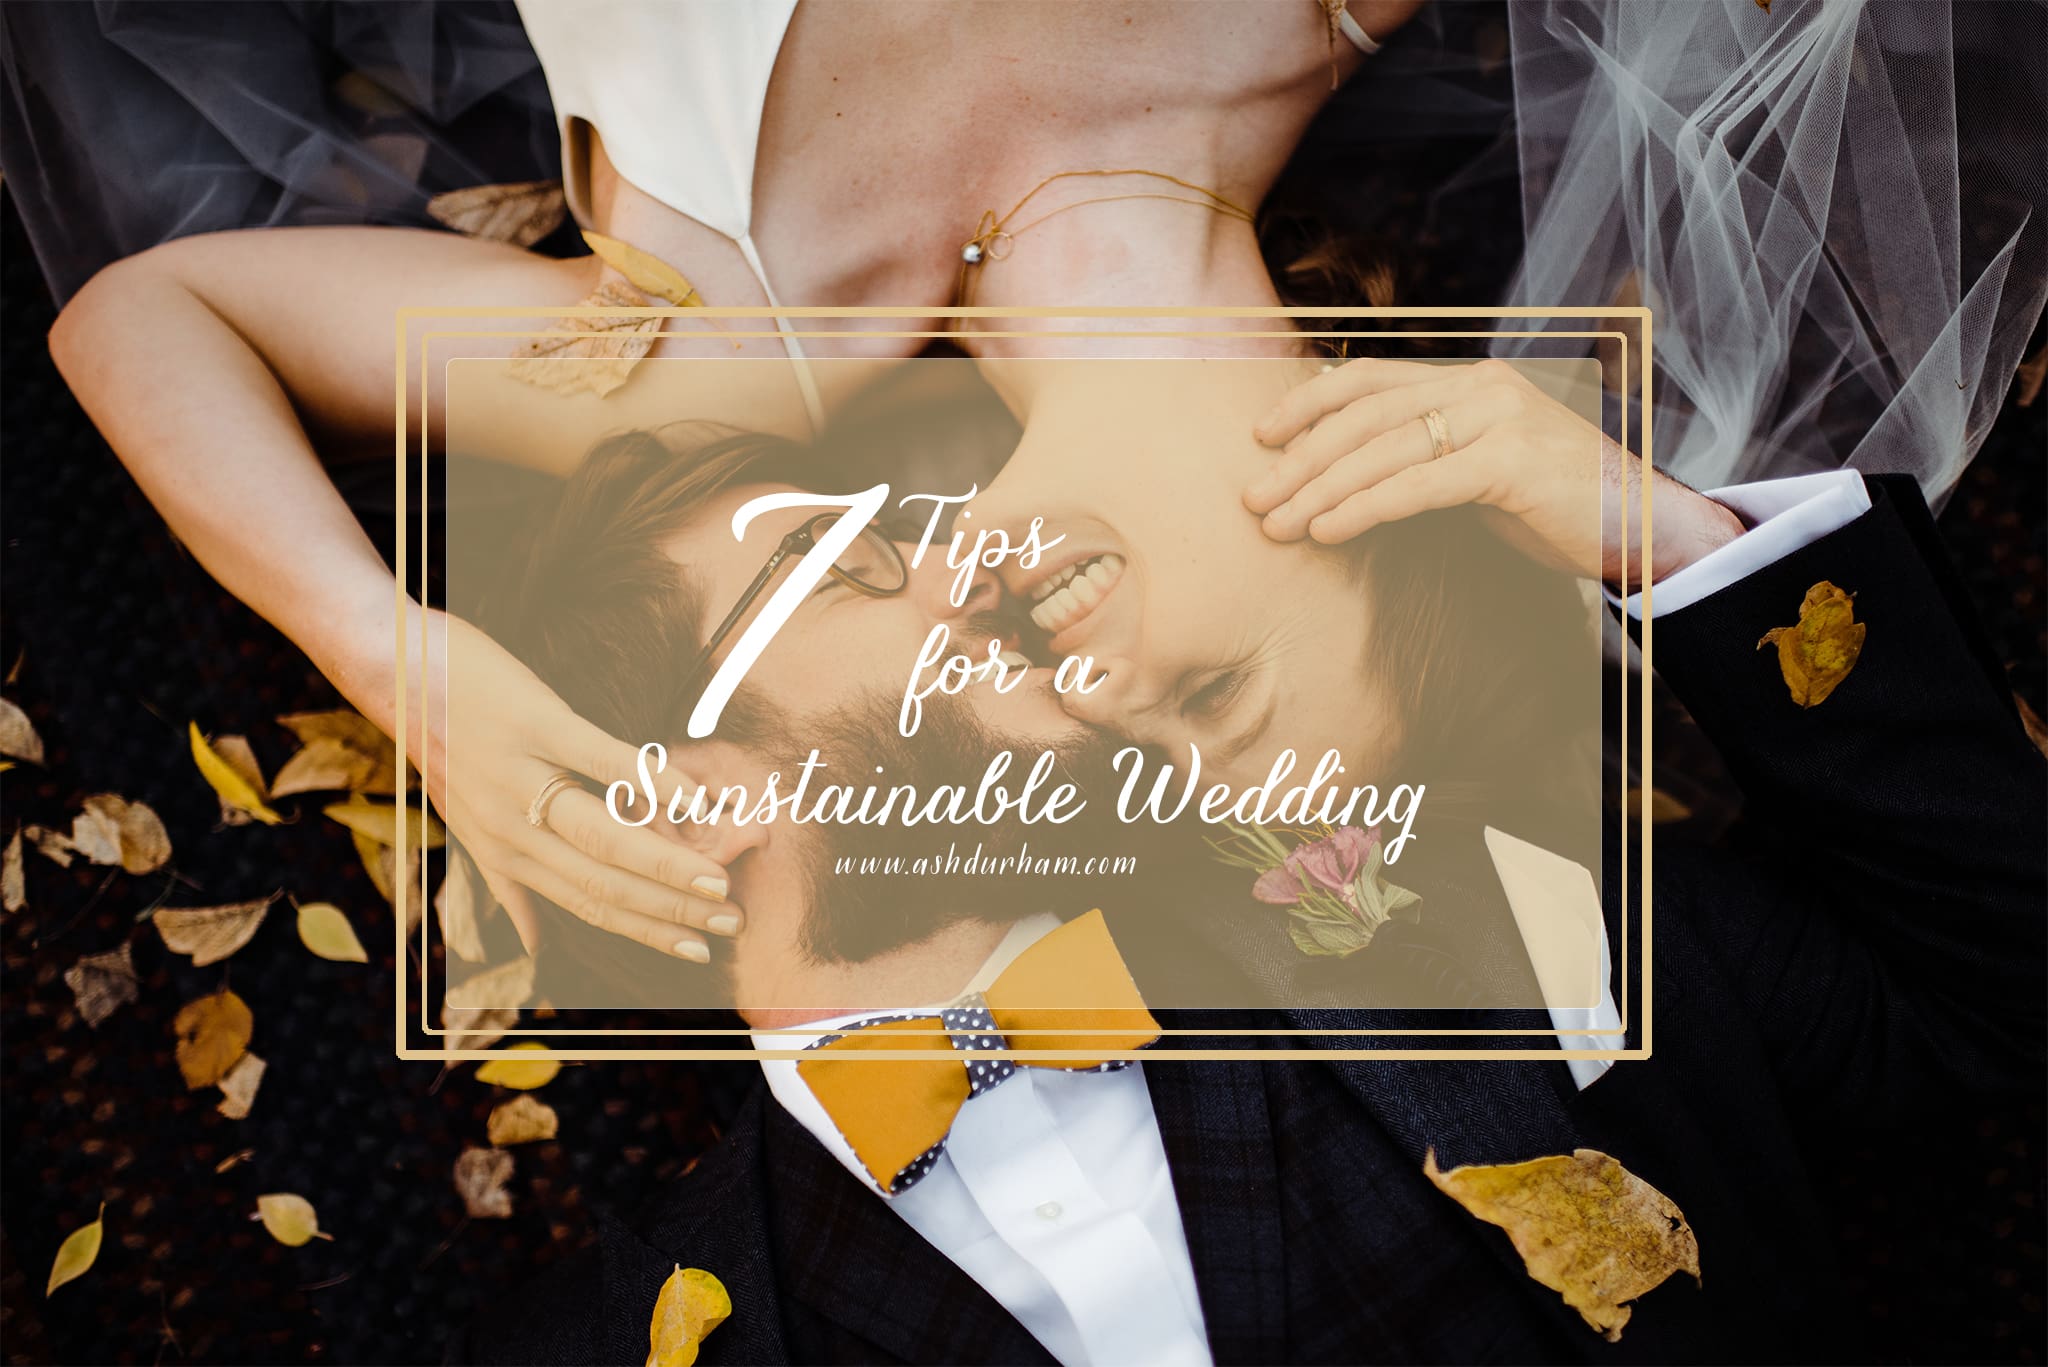 7 tips for a sustainable wedding